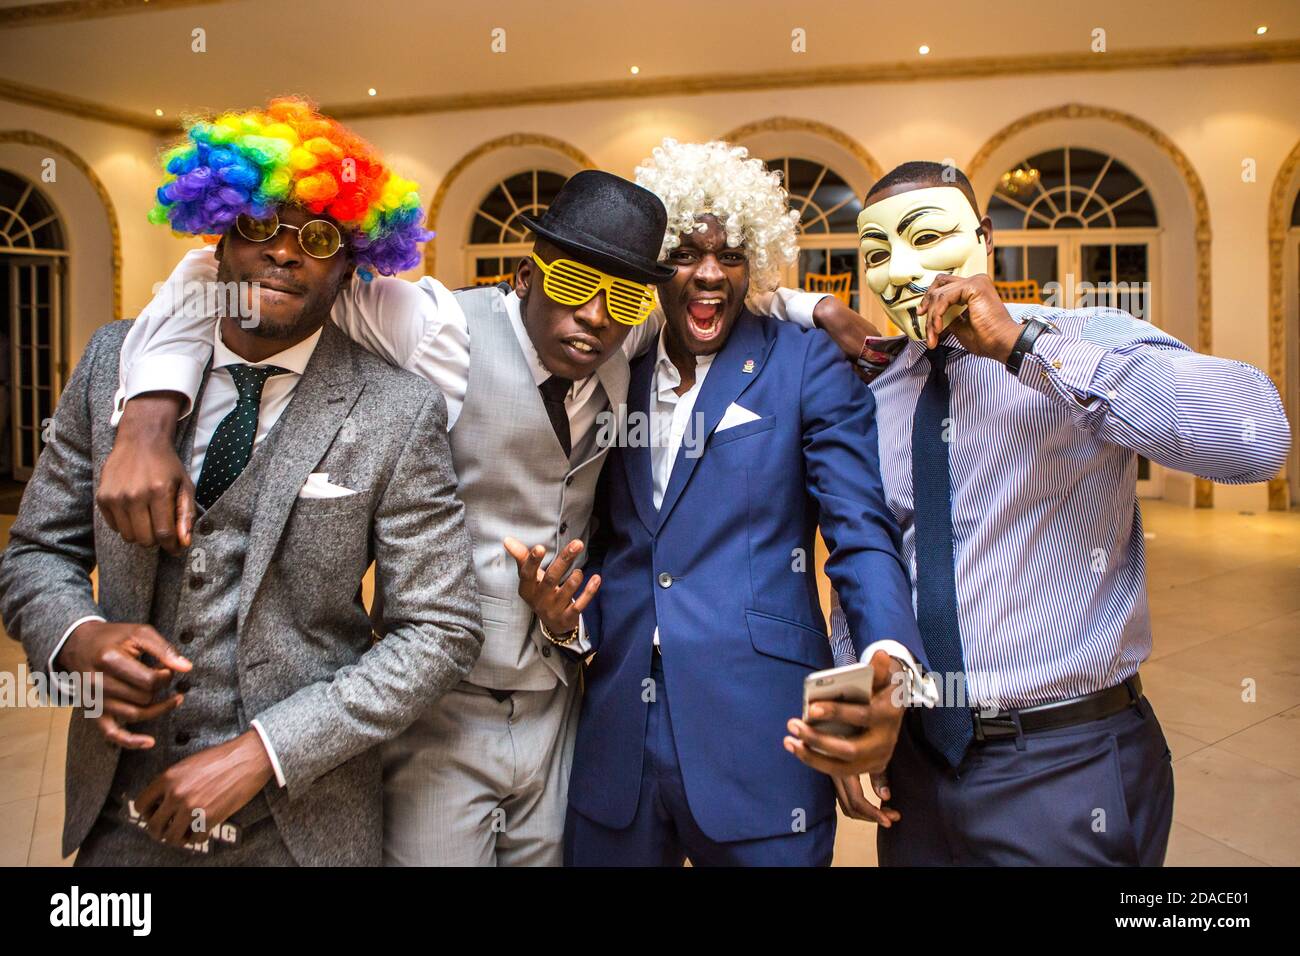 masked men at a party Stock Photo